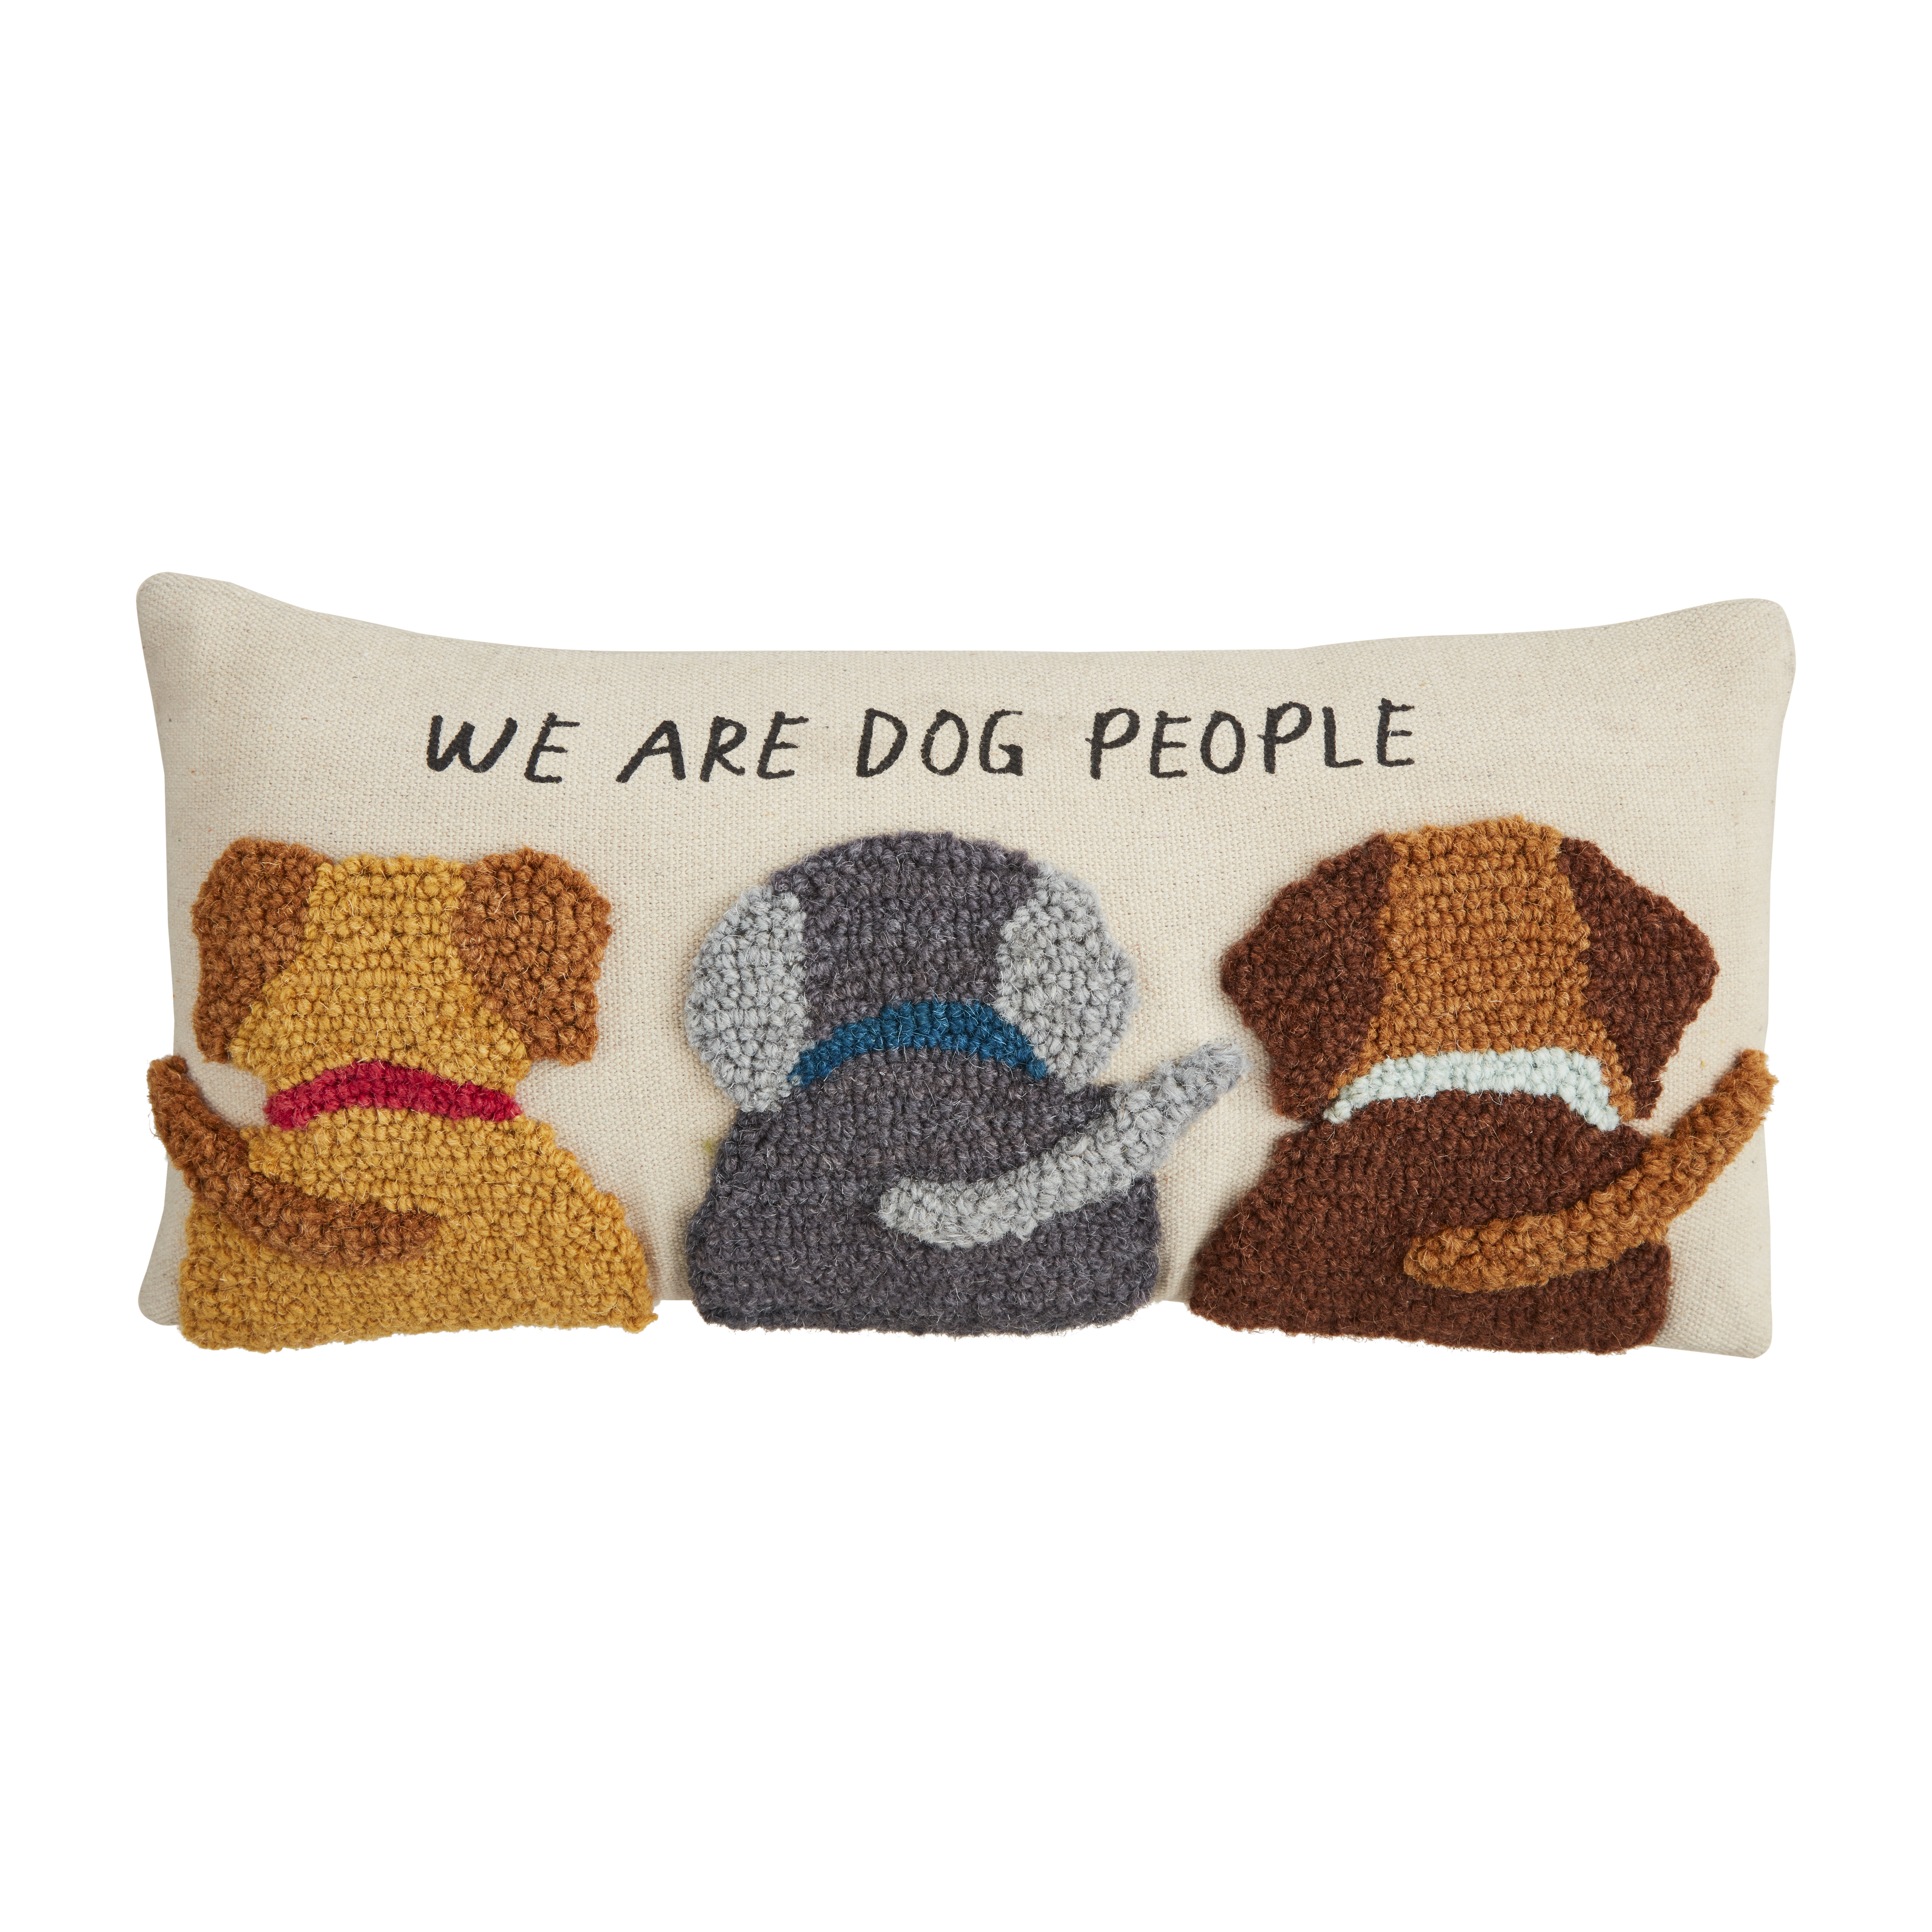 Hooked Dog Pillows